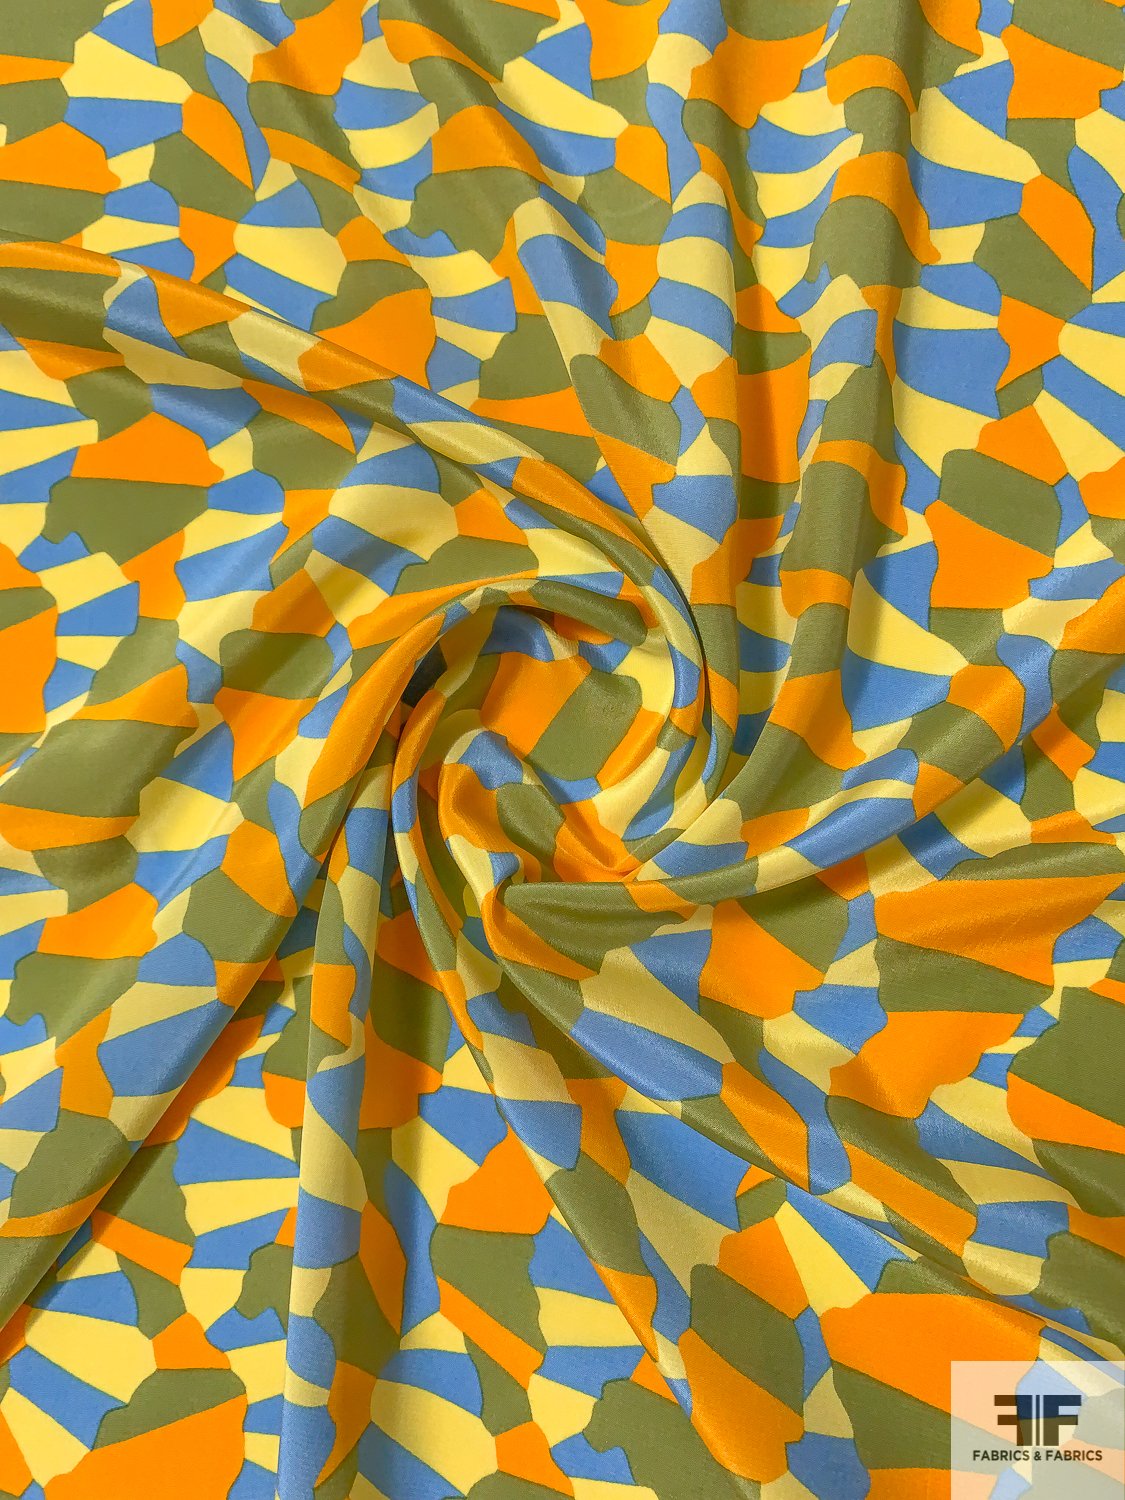 Graphic Printed Silk Crepe de Chine - Butter Yellow / Orange / Olive Green / Periwinkle Blue